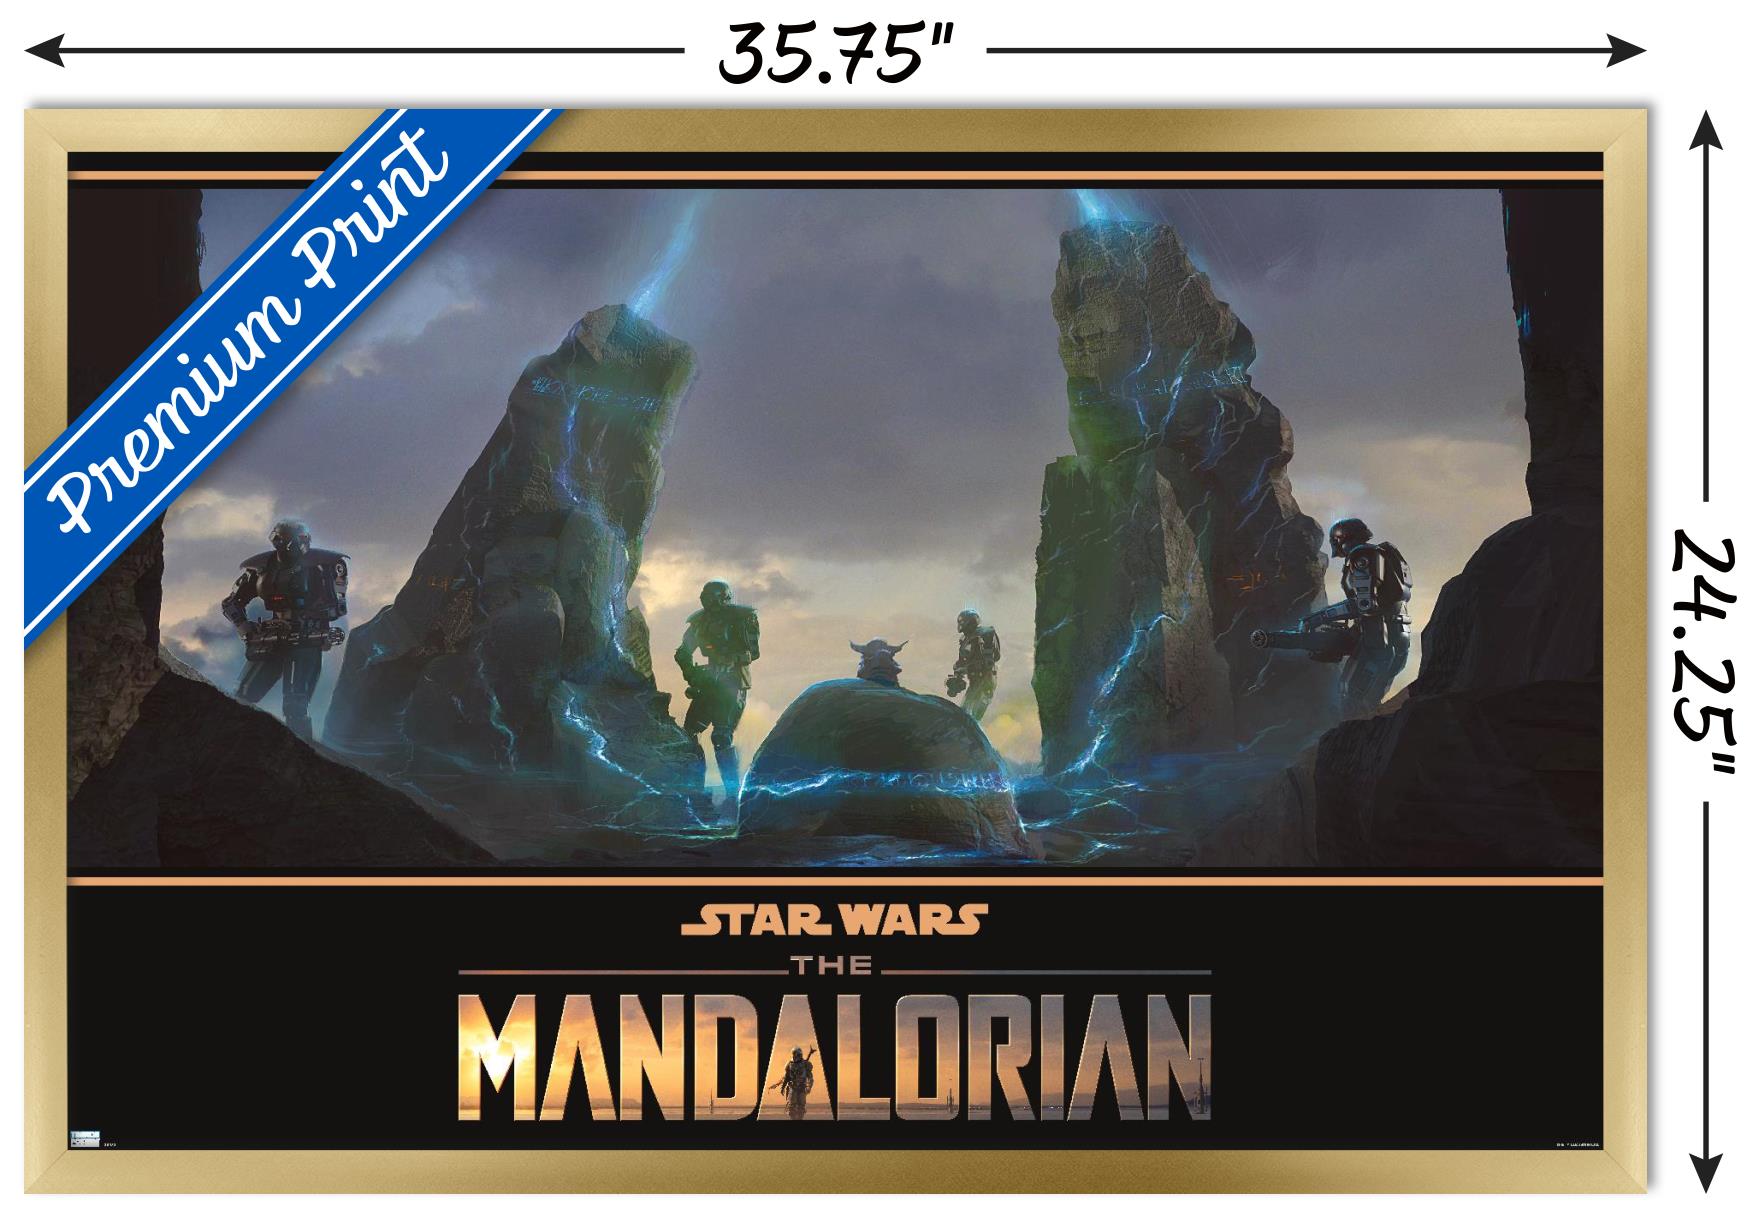 Star Wars: The Mandalorian Season 2 - Seeing Stone Wall Poster, 22.375" x 34", Framed - image 3 of 5